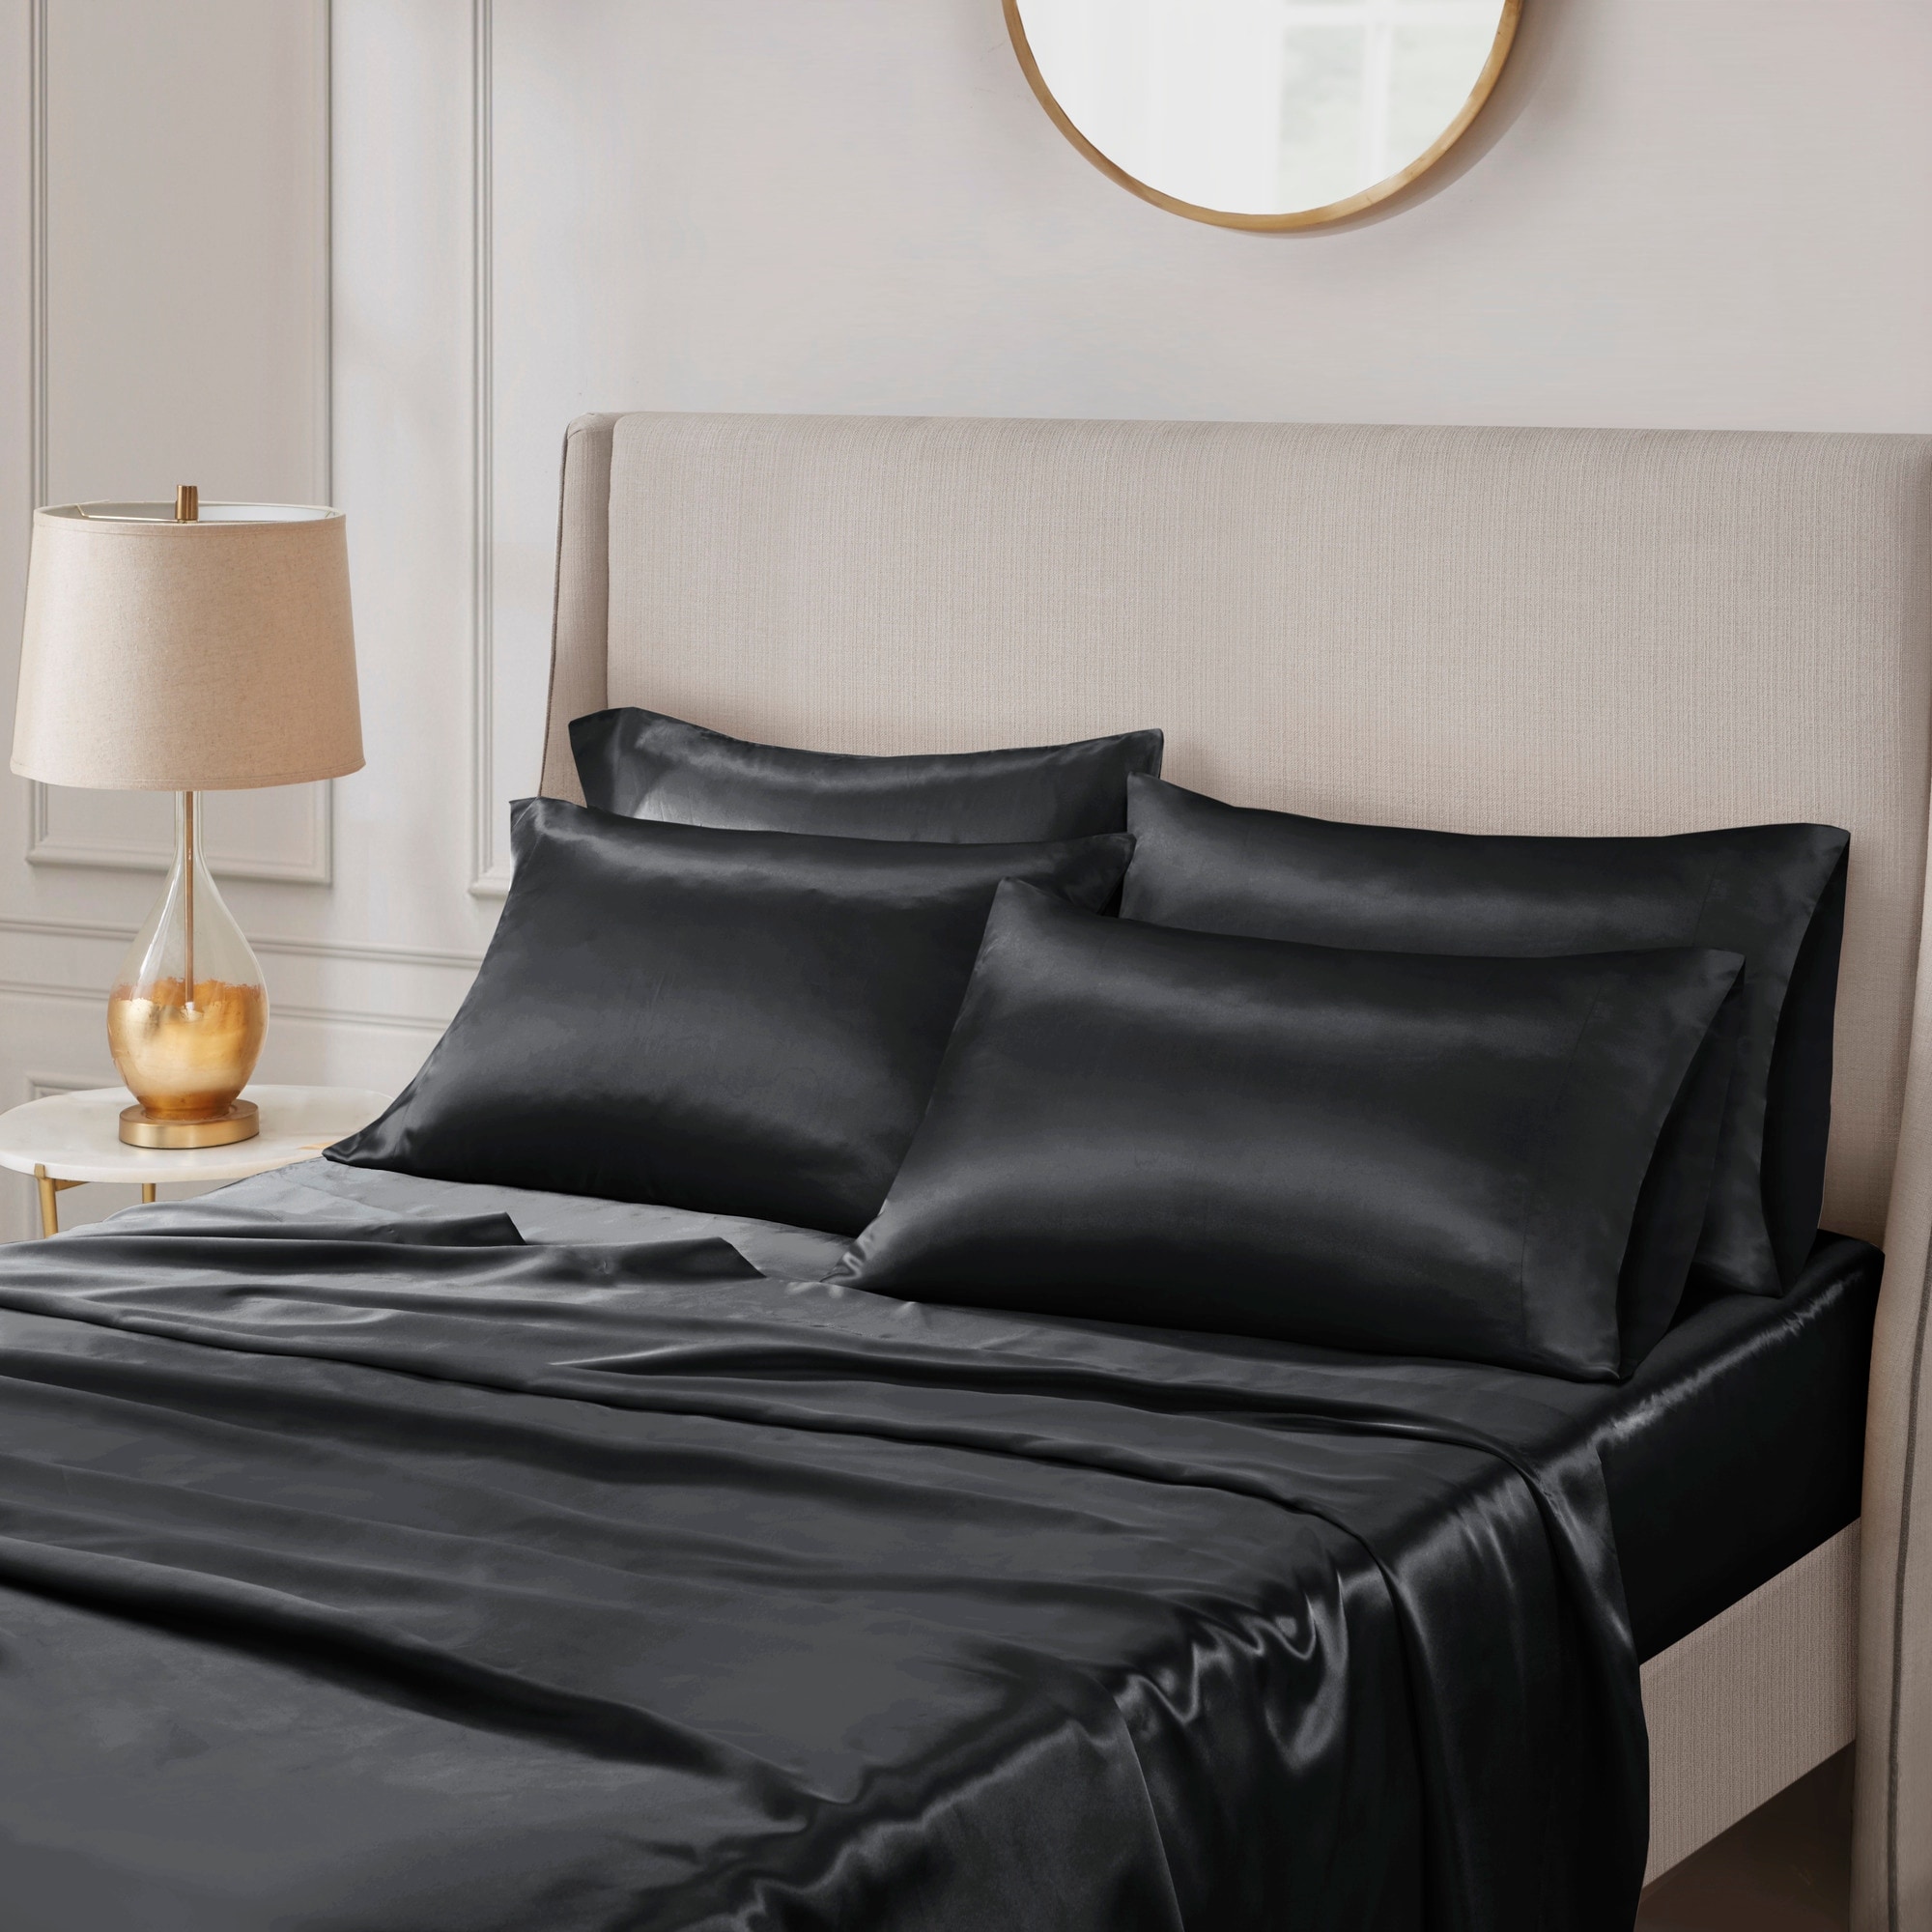 https://ak1.ostkcdn.com/images/products/is/images/direct/ec586826eedf2a38f5a82f4f864bc149ed0c12d1/Madison-Park-Essentials-Satin-Luxury-6-PC-Sheet-Set.jpg